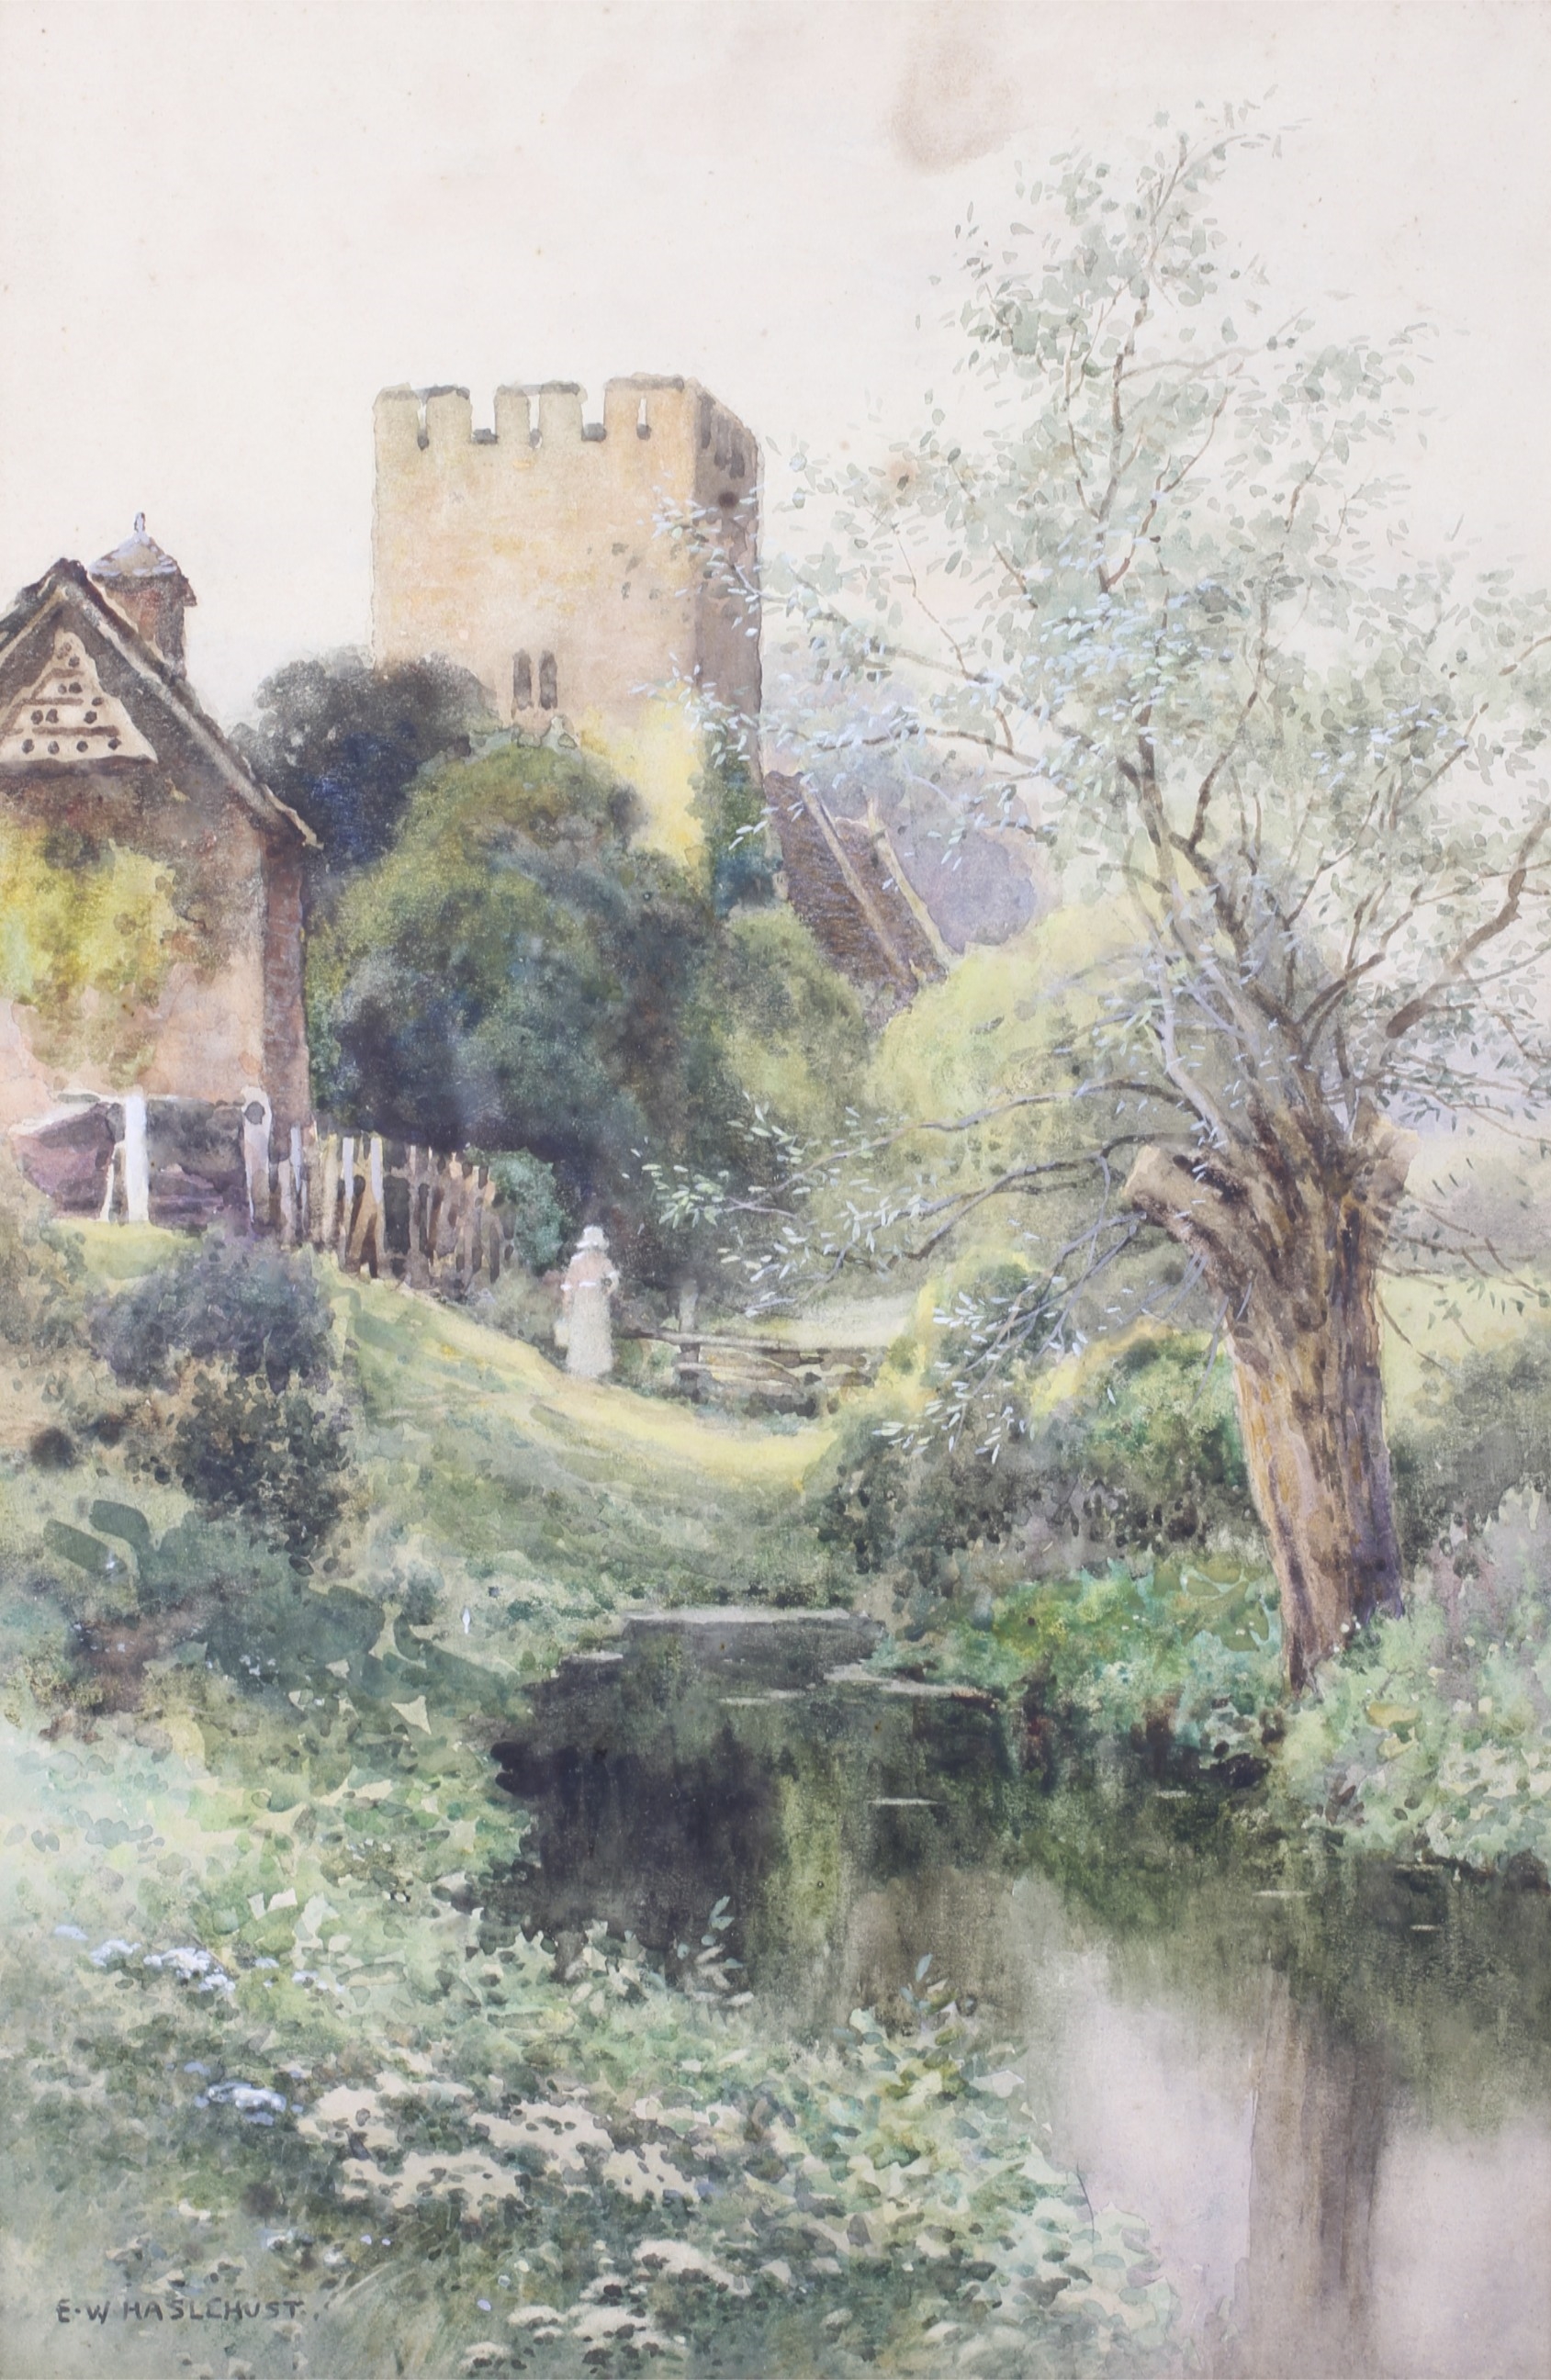 St Mary's 'Monnington Church, Hereford by Ernest W. Haslehust